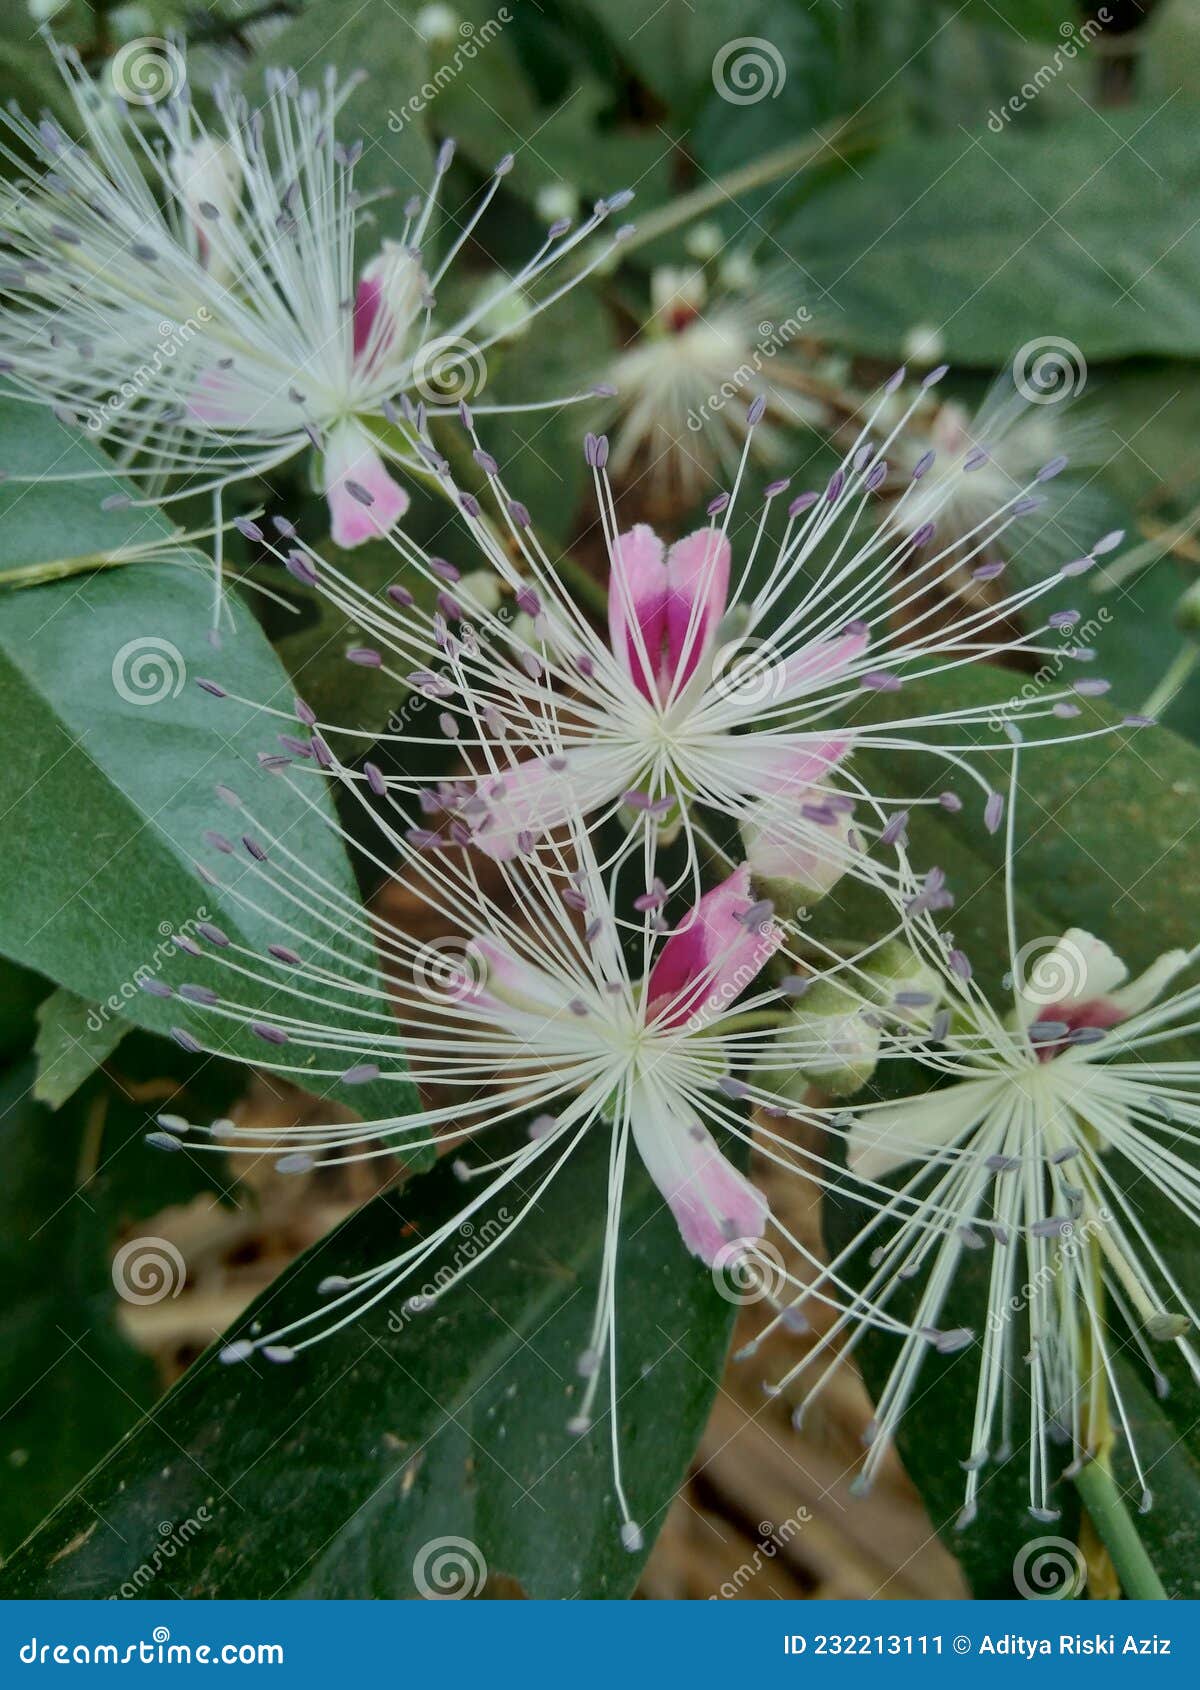 the capparaceae or capparidaceae, commonly known as the caper family, are a family of plants in the order brassicales. as currentl